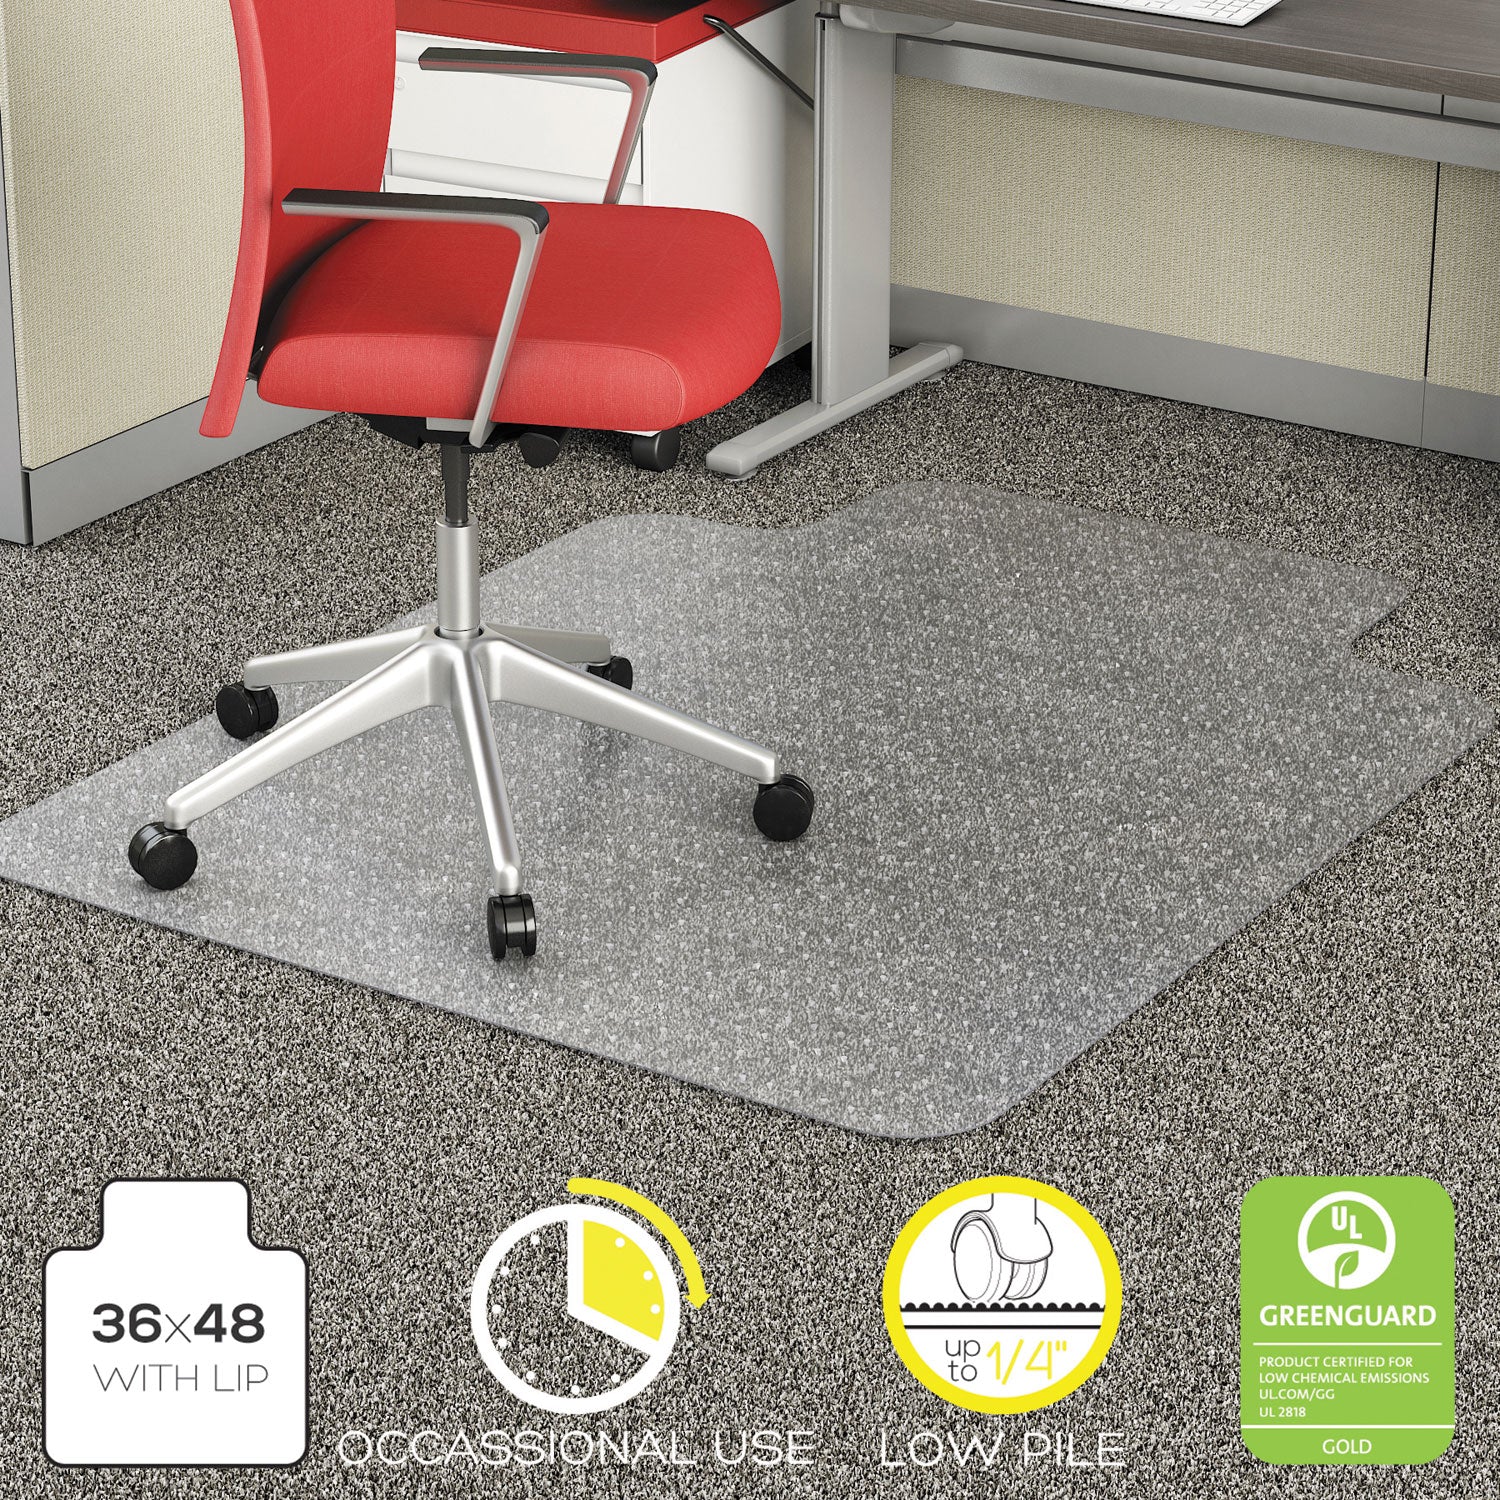 economat-occasional-use-chair-mat-low-pile-carpet-roll-36-x-48-lipped-clear_defcm11112com - 1